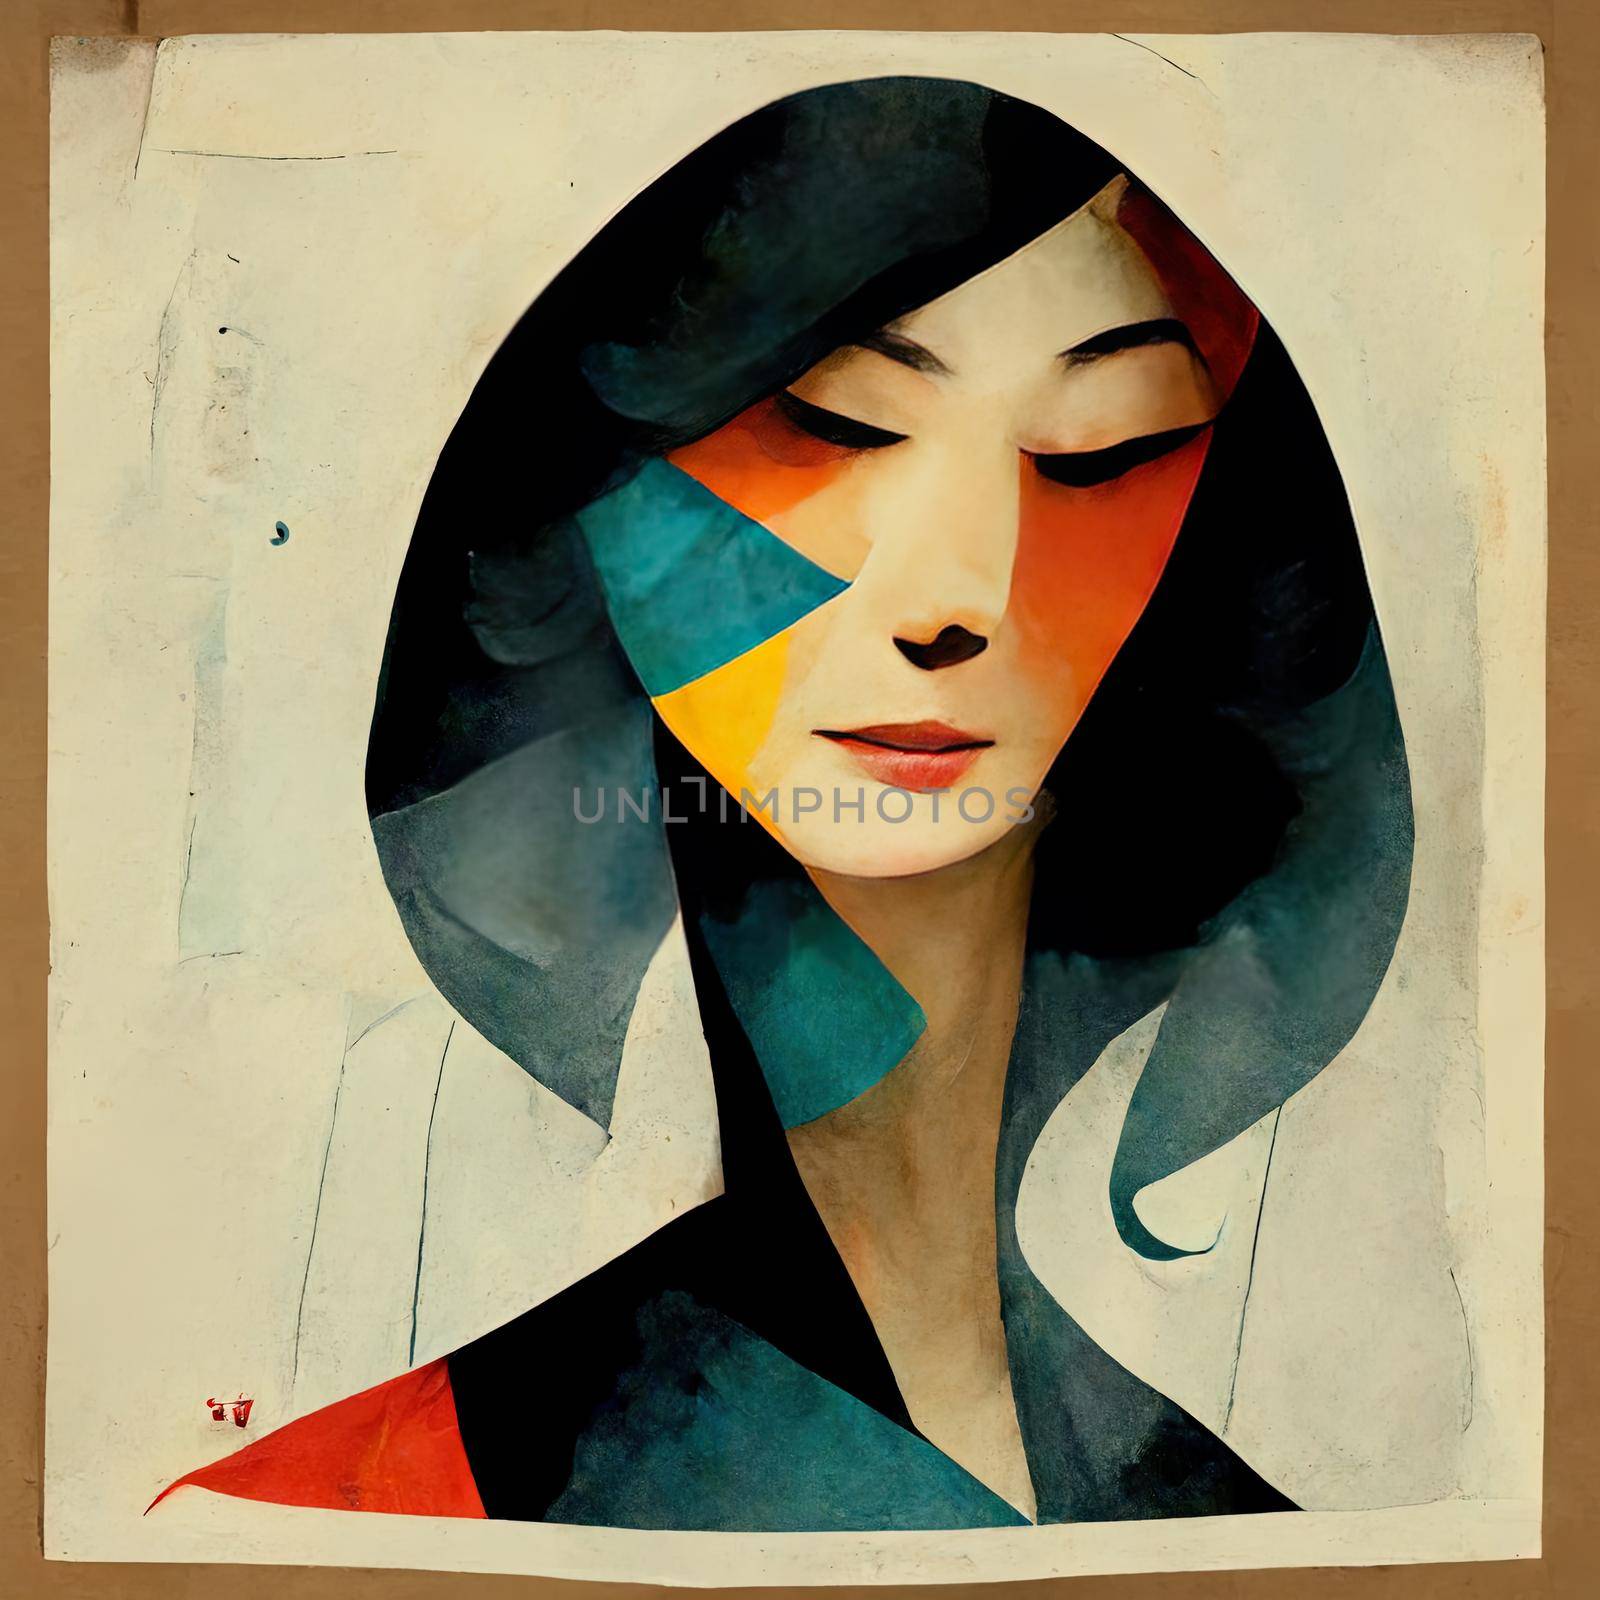 Abstract illustration of a stylised woman face by 2ragon